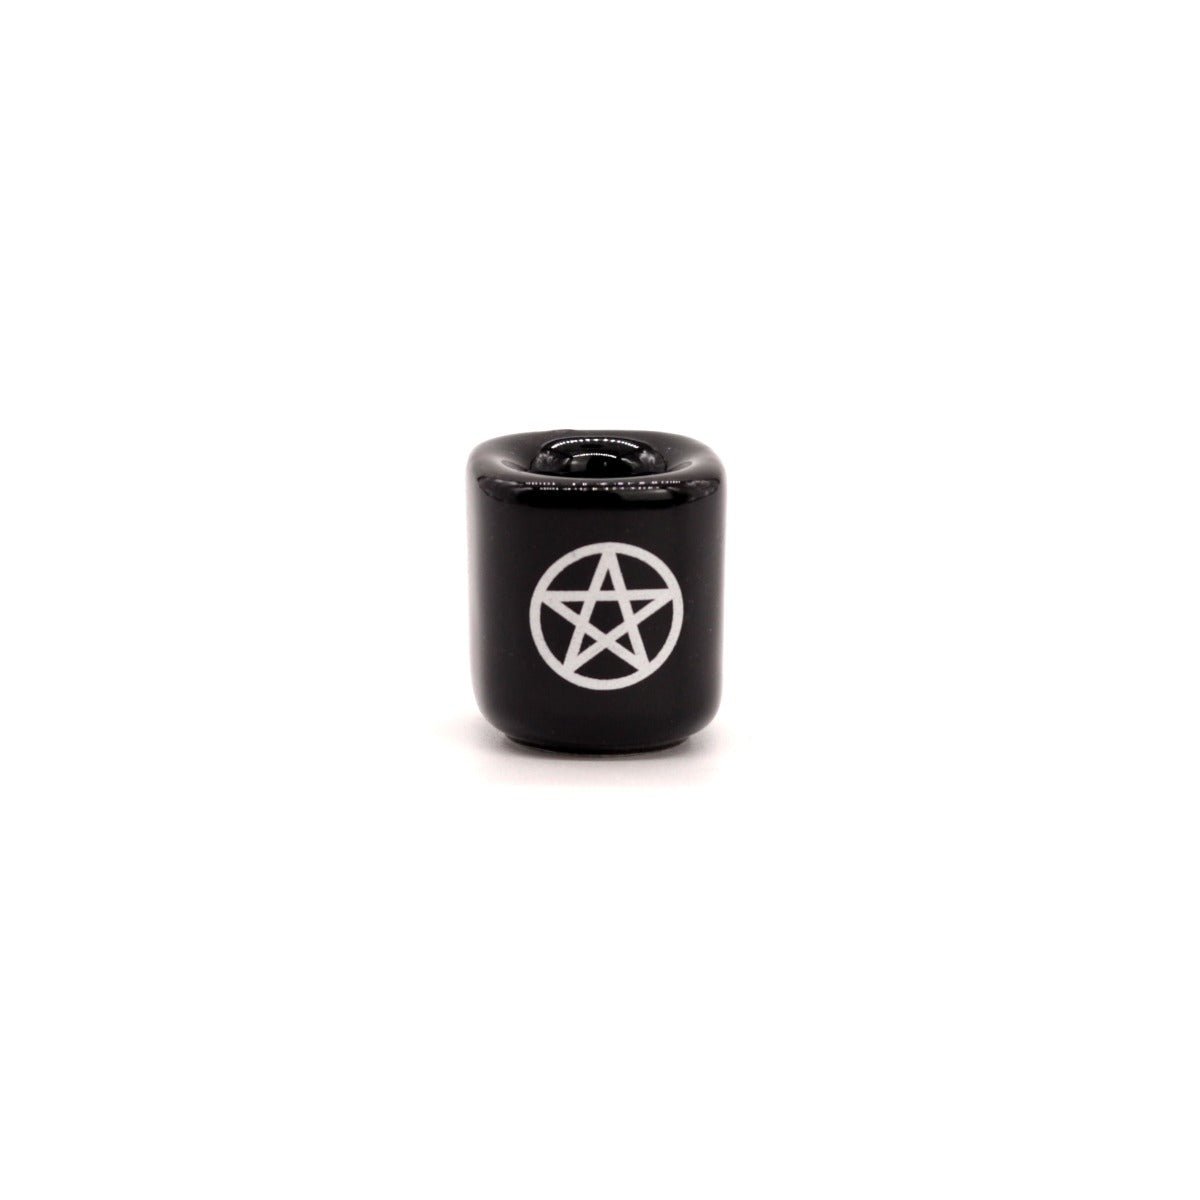 Black with White Pentacle Chime Candle Holder - 13 Moons